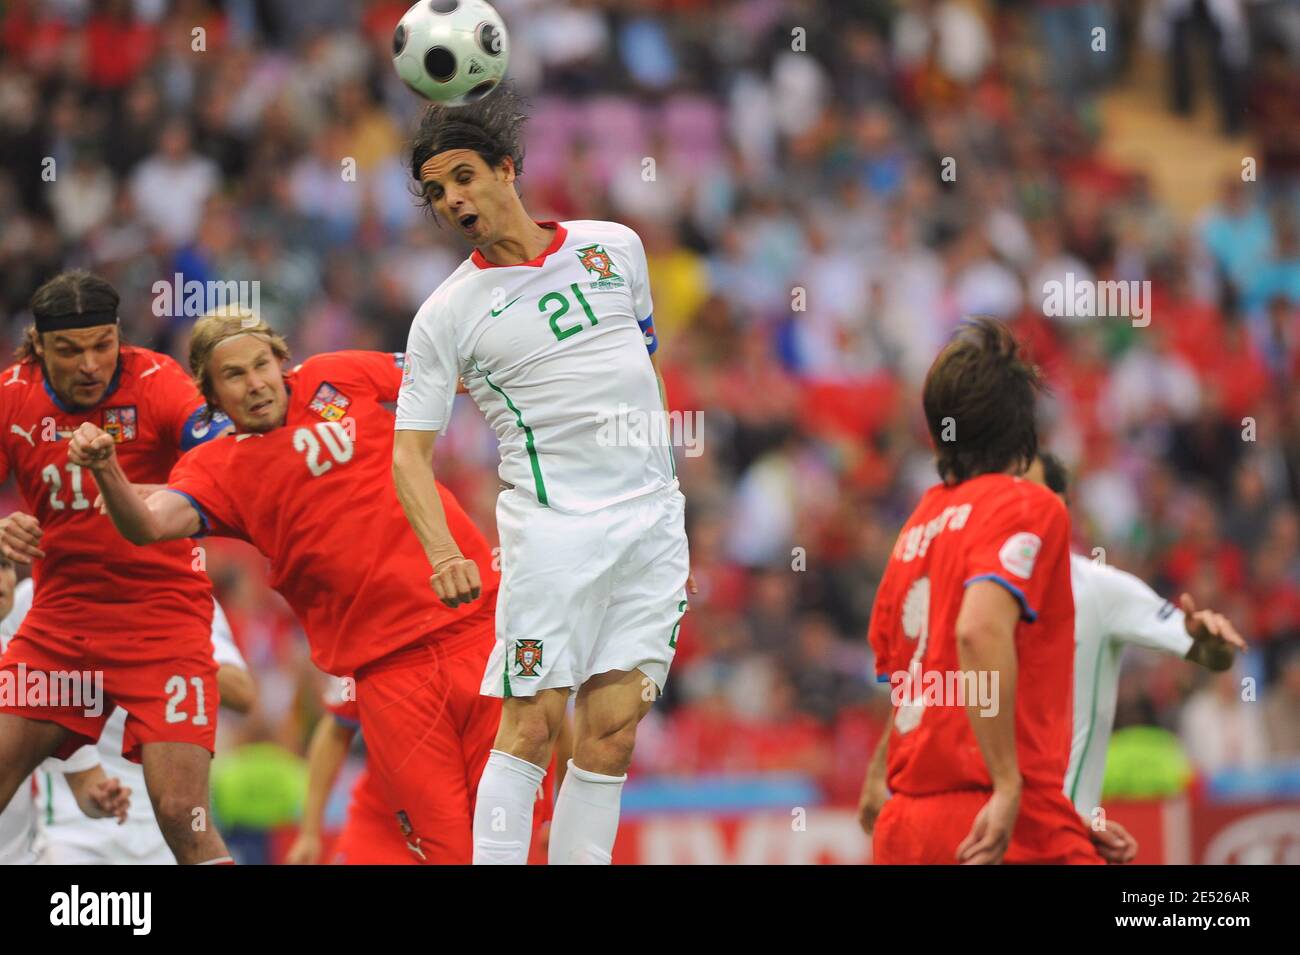 Portugal's captain Nuno Gomes during the Euro 2008 UEFA Championships soccer match, Group A, Portugal vs Czech Republic at Stade de Geneve in Geneva, Switzerland on June 11, 2008. Portugal won 3-1. Photo by Steeve McMay/Cameleon/ABACAPRESS.COM Stock Photo